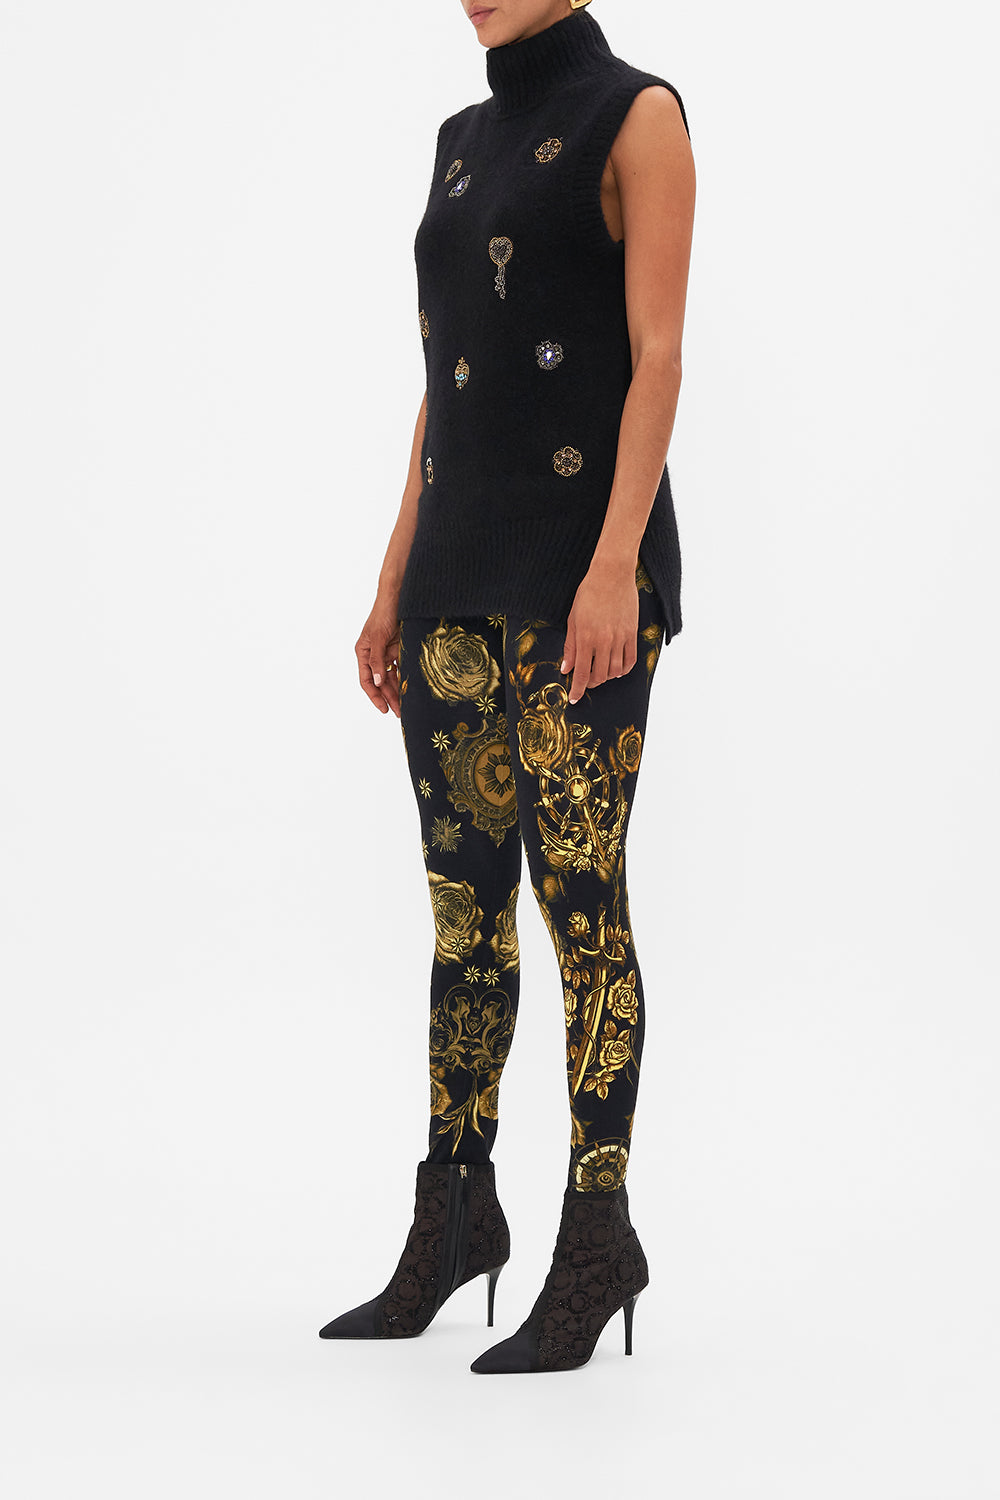 CAMILLA leopard relaxed sleeveless turtleneck knit top in Amsterglam print.